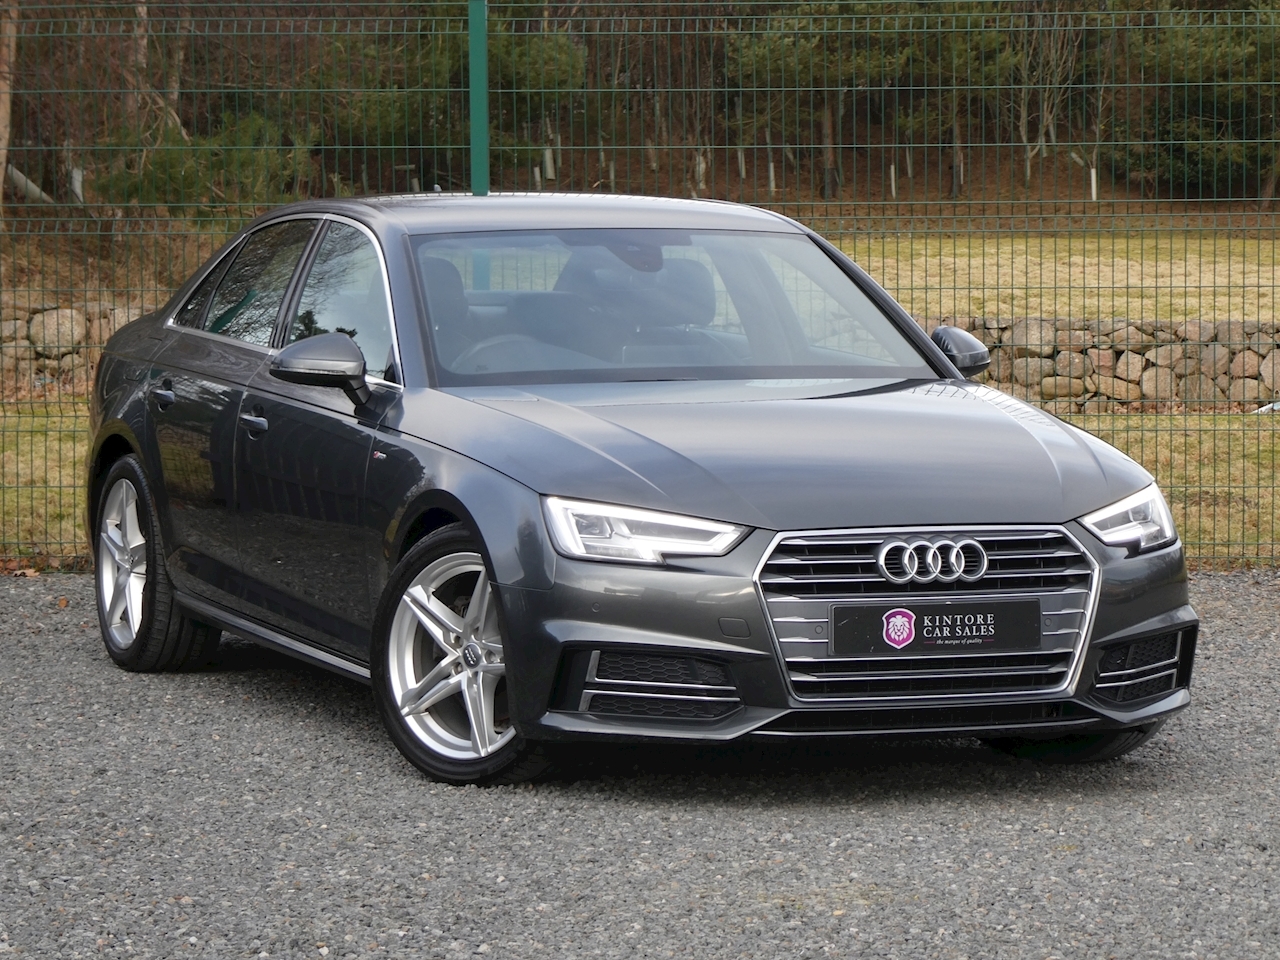 A4 2.0TDI S line Saloon, S-Tronic 2.0 4dr Saloon Automatic Diesel